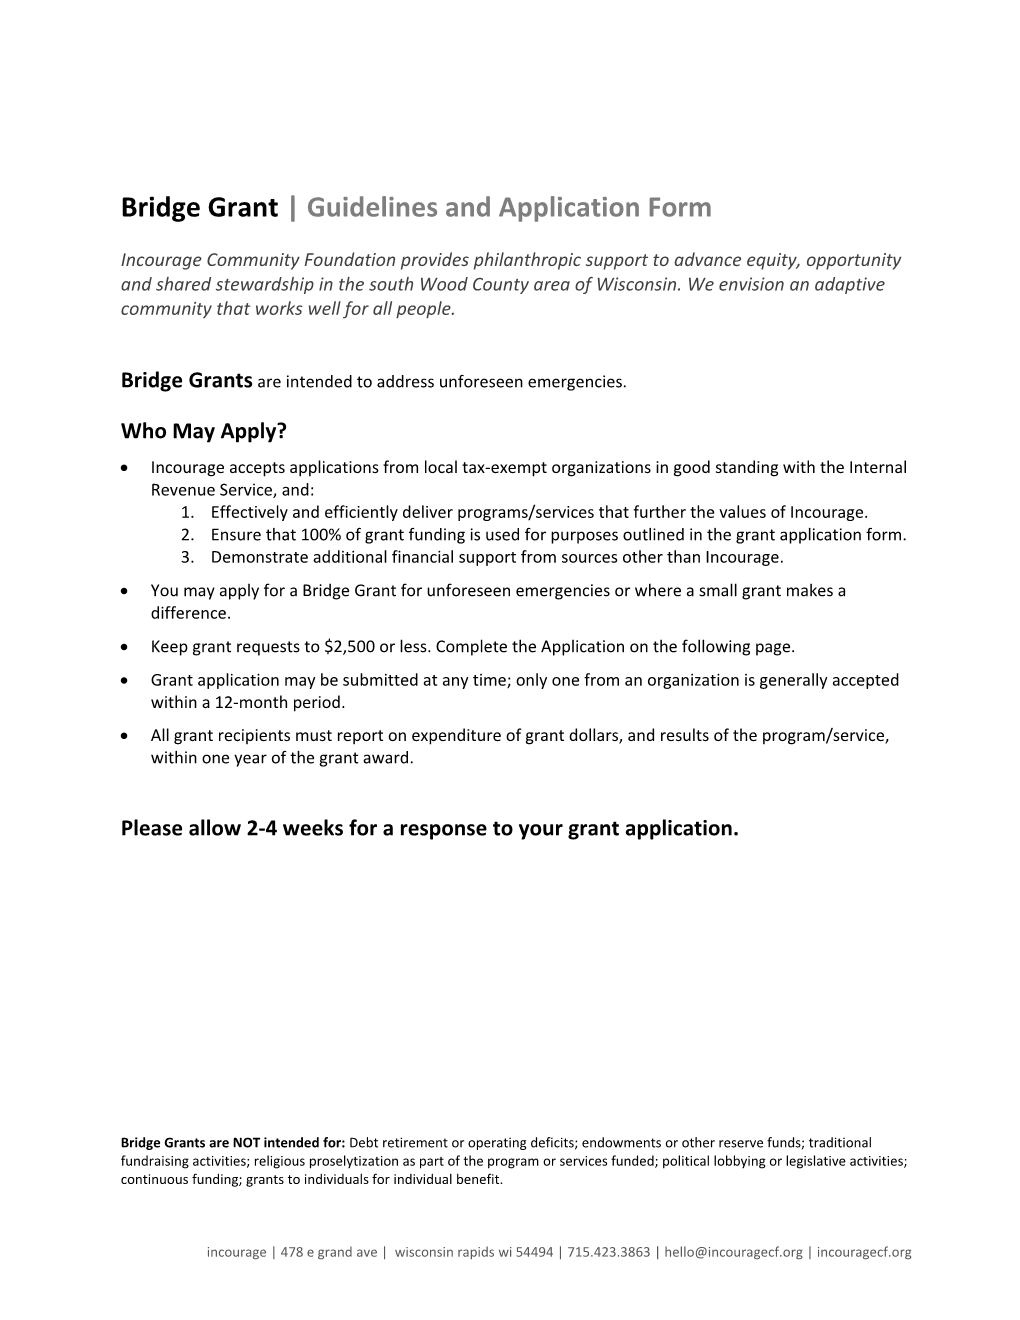 Bridge Grant Guidelines and Application Form